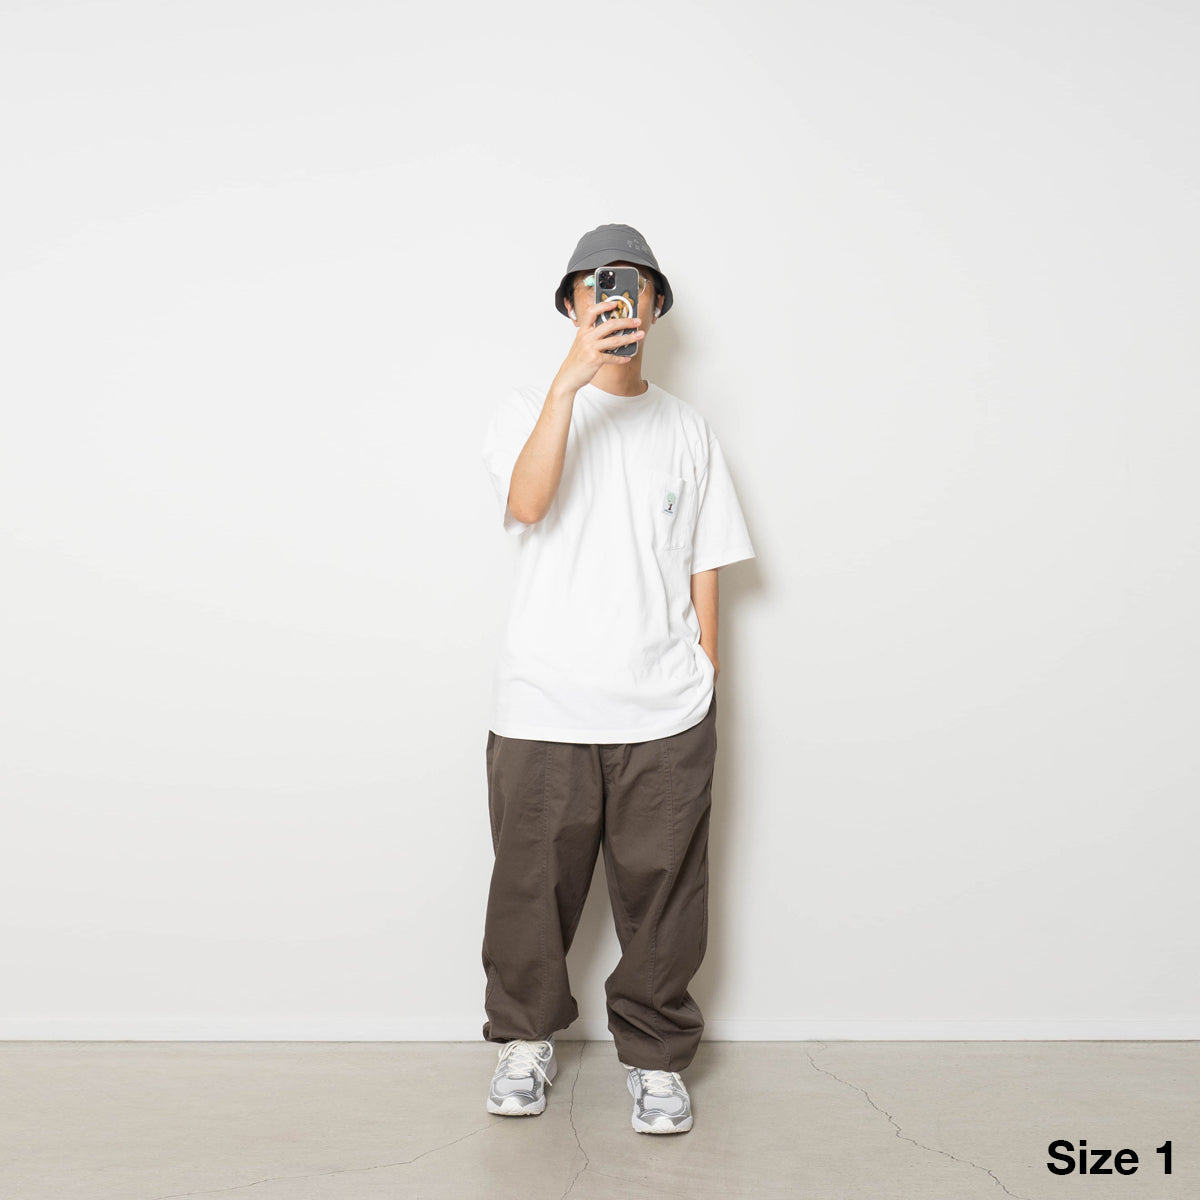 Cotton Twill Baggy Pants - Navy